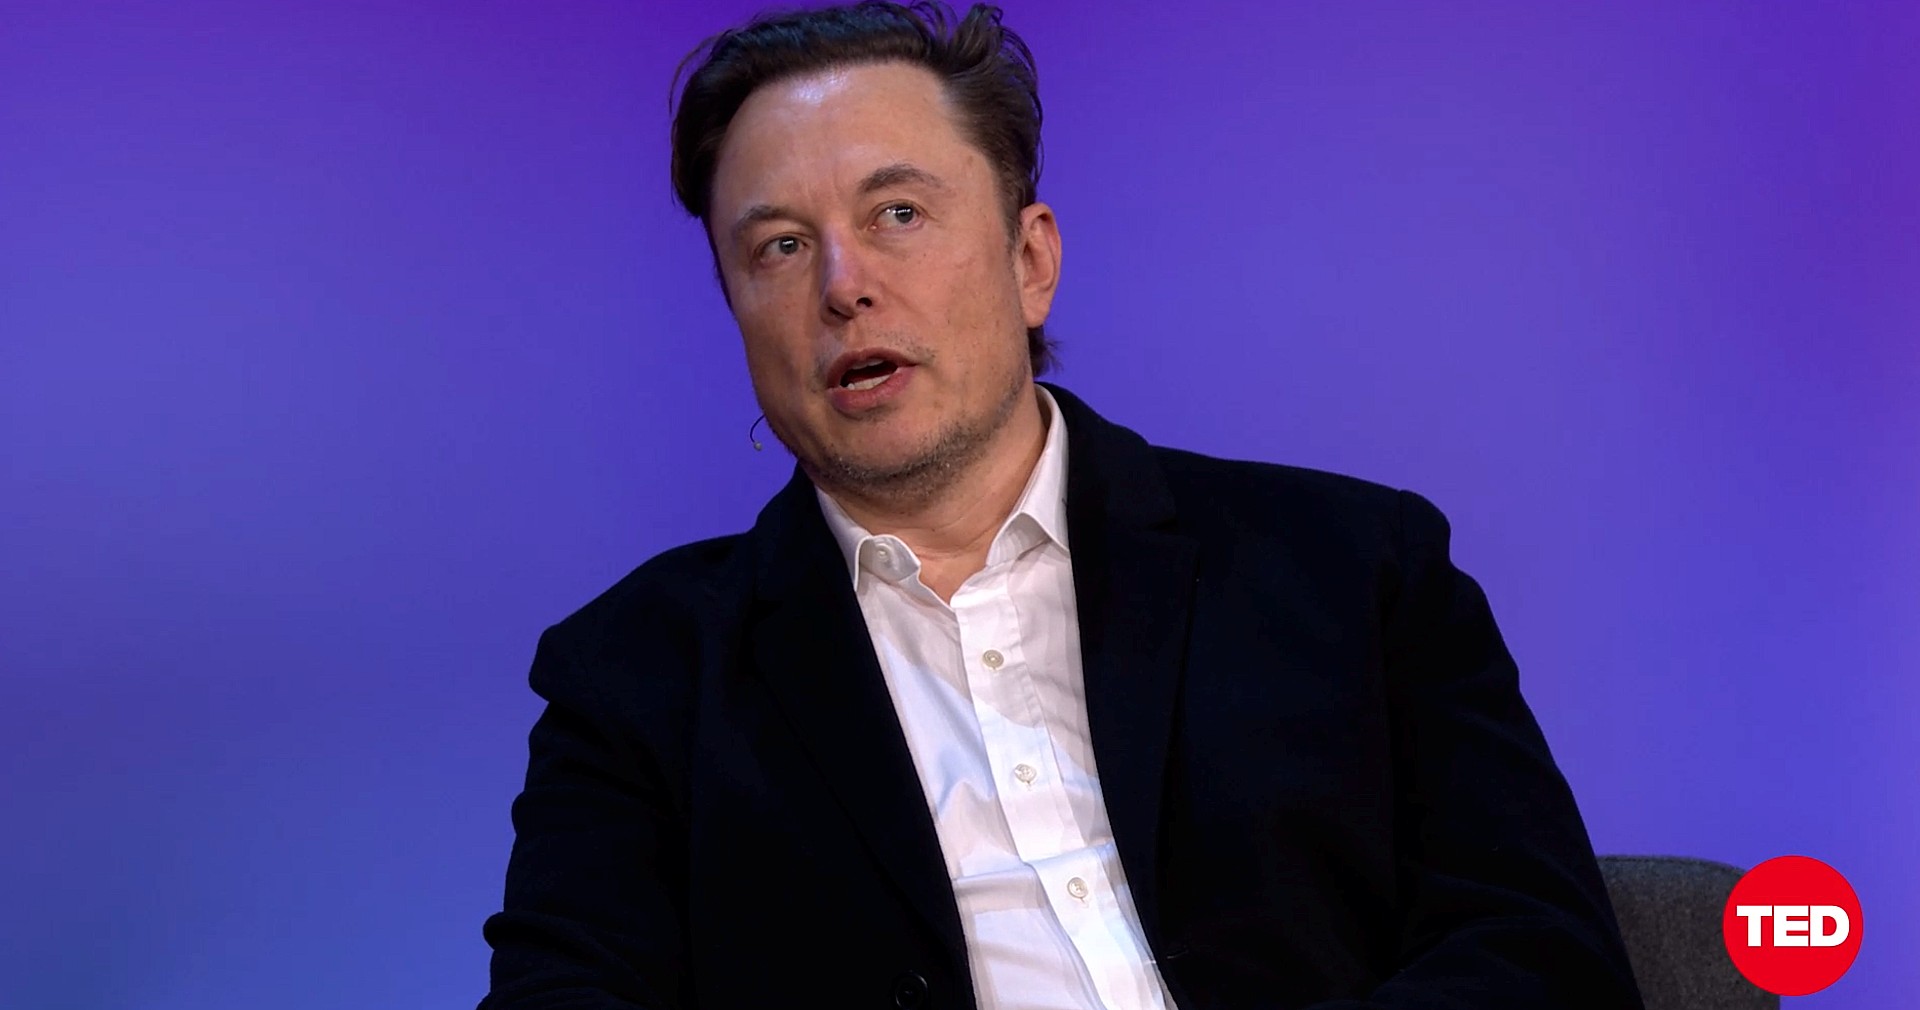 Elon Musk agrees with fmr president of PayPal on PayPal’s drastic move